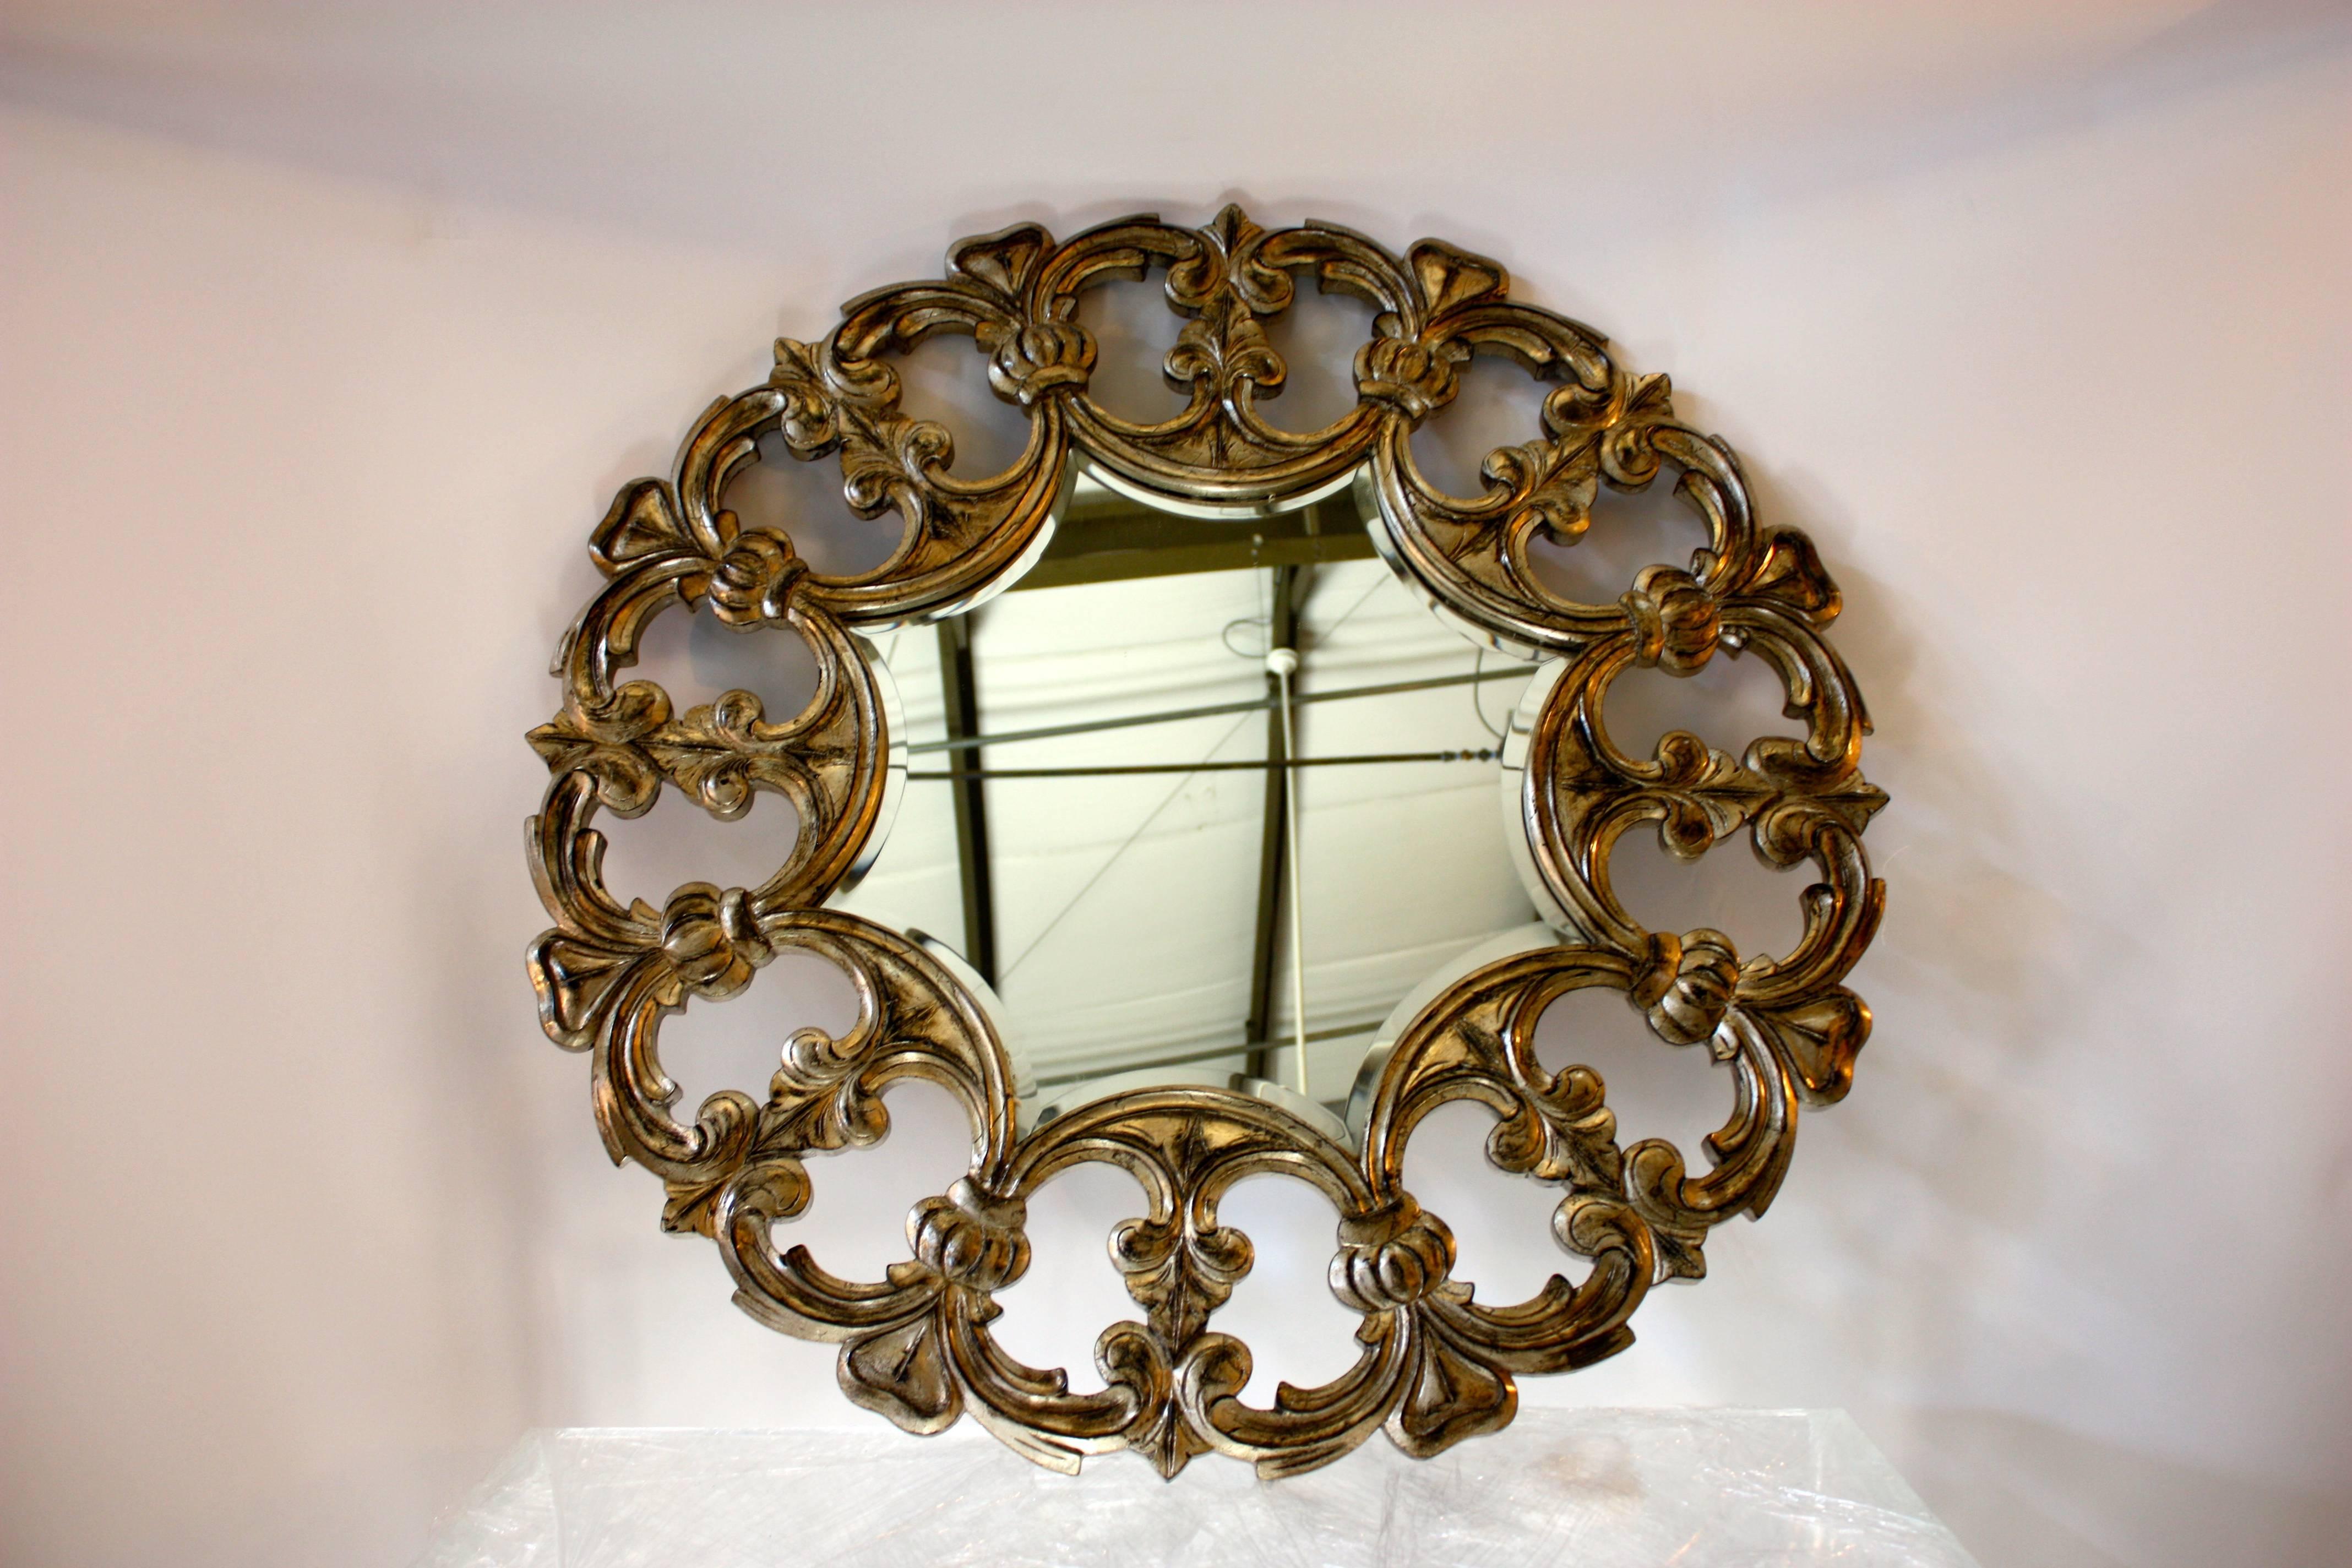 Baroque styled wall mirror.